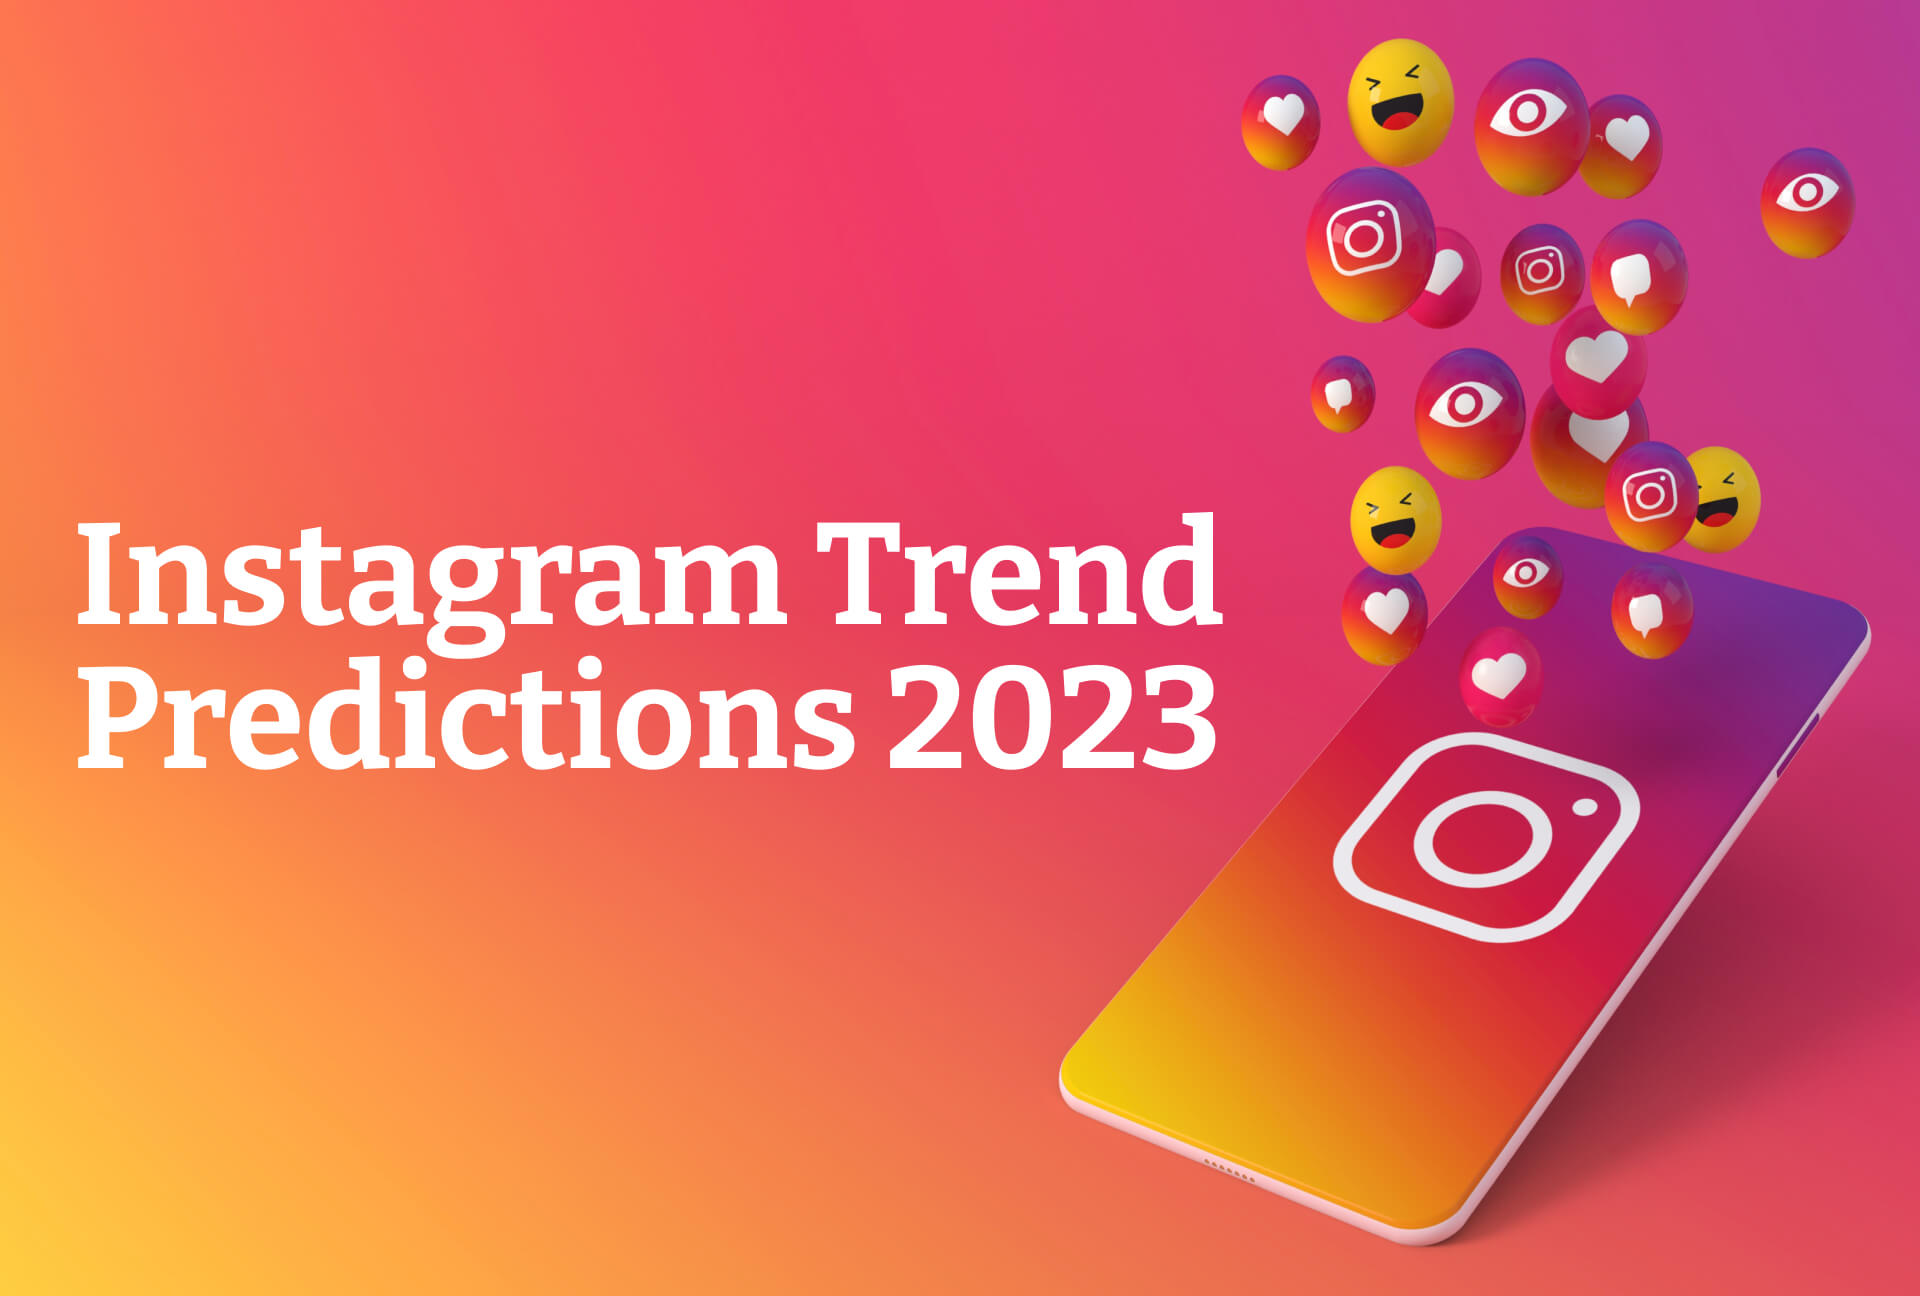 Get Ready Now A Look at Instagram Predictions and Trends in